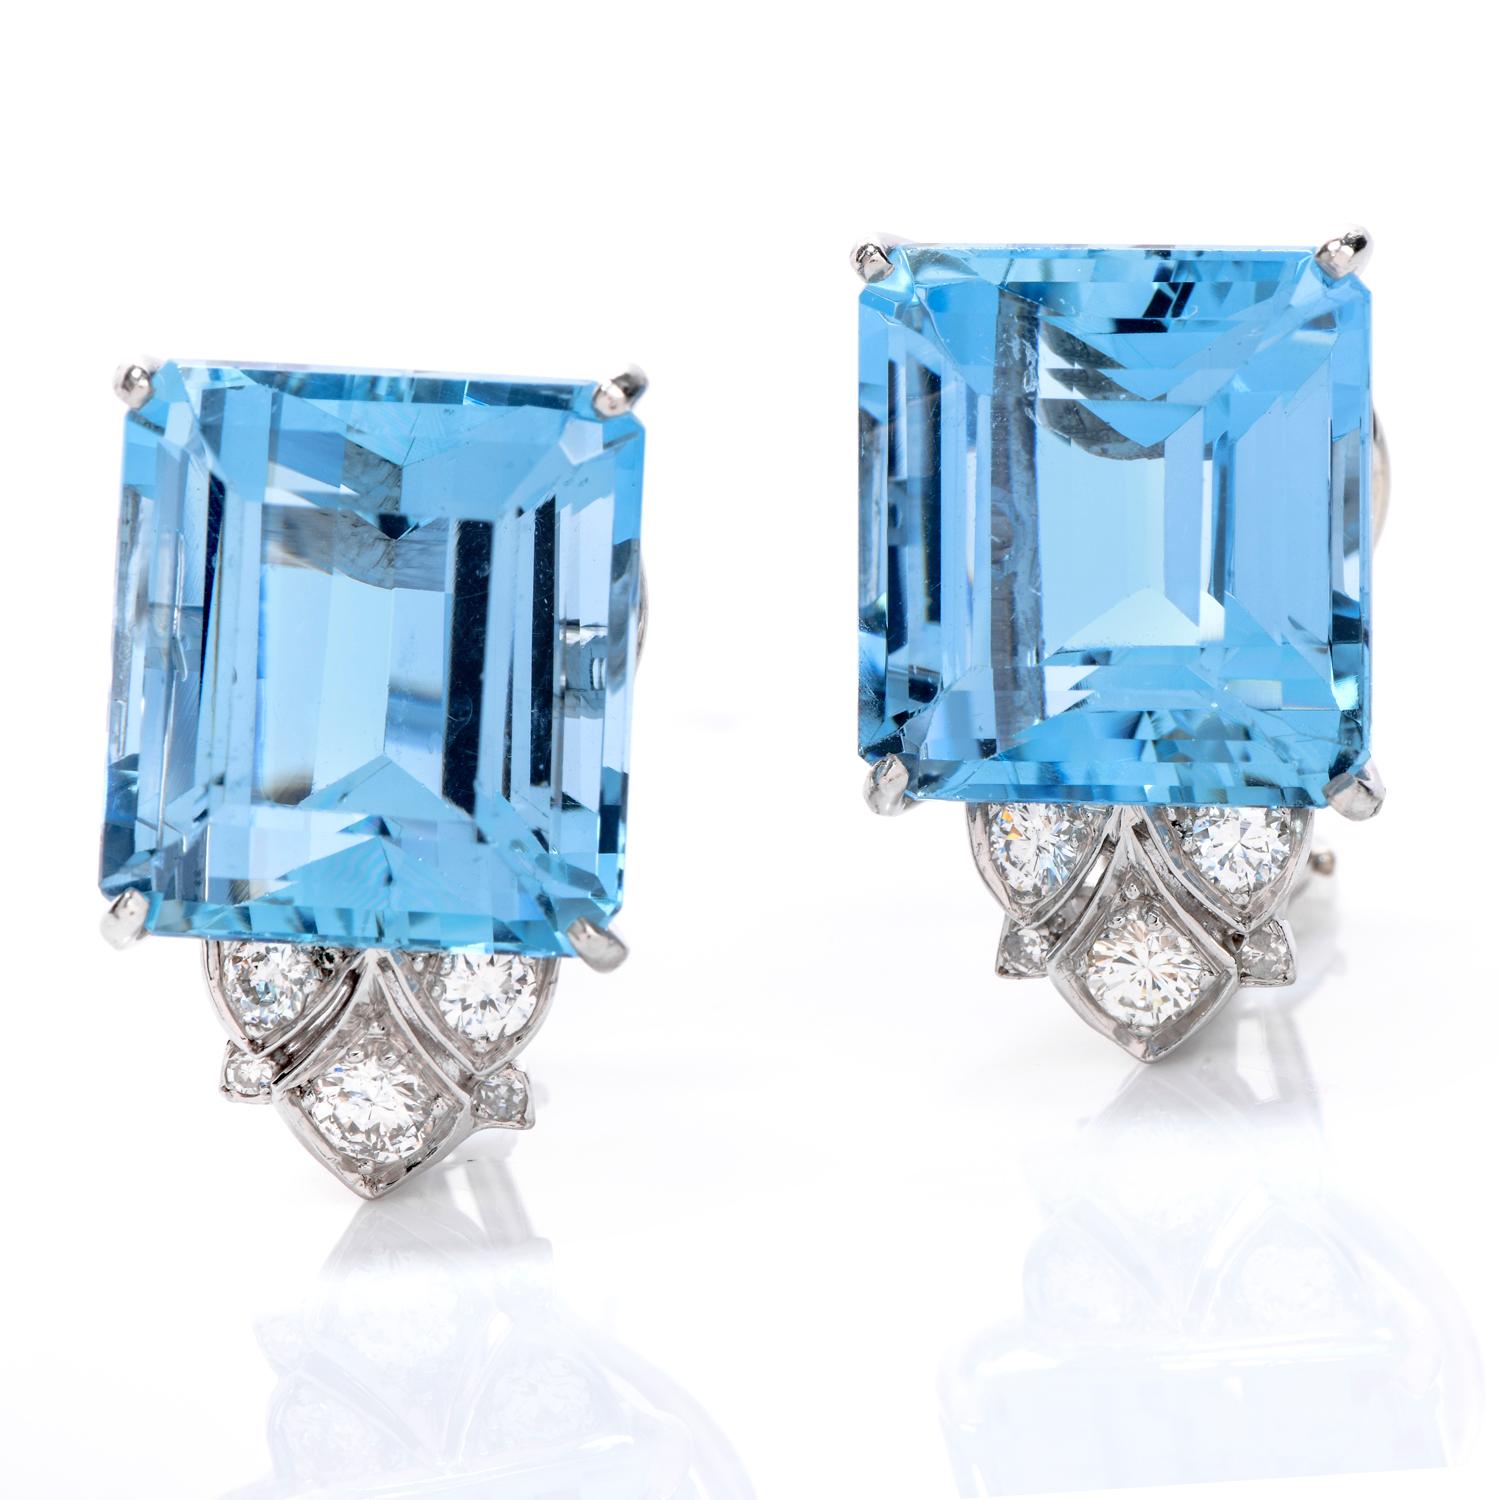 Admire these angelic Diamond Aquamarine & Platinum earrings every day! 

These large emerald-cut Aquamarines are eye-clean and sky blue.  The elegance is evident in its fitting emerald cut and platinum prong setting. 

The aquamarines are crowned